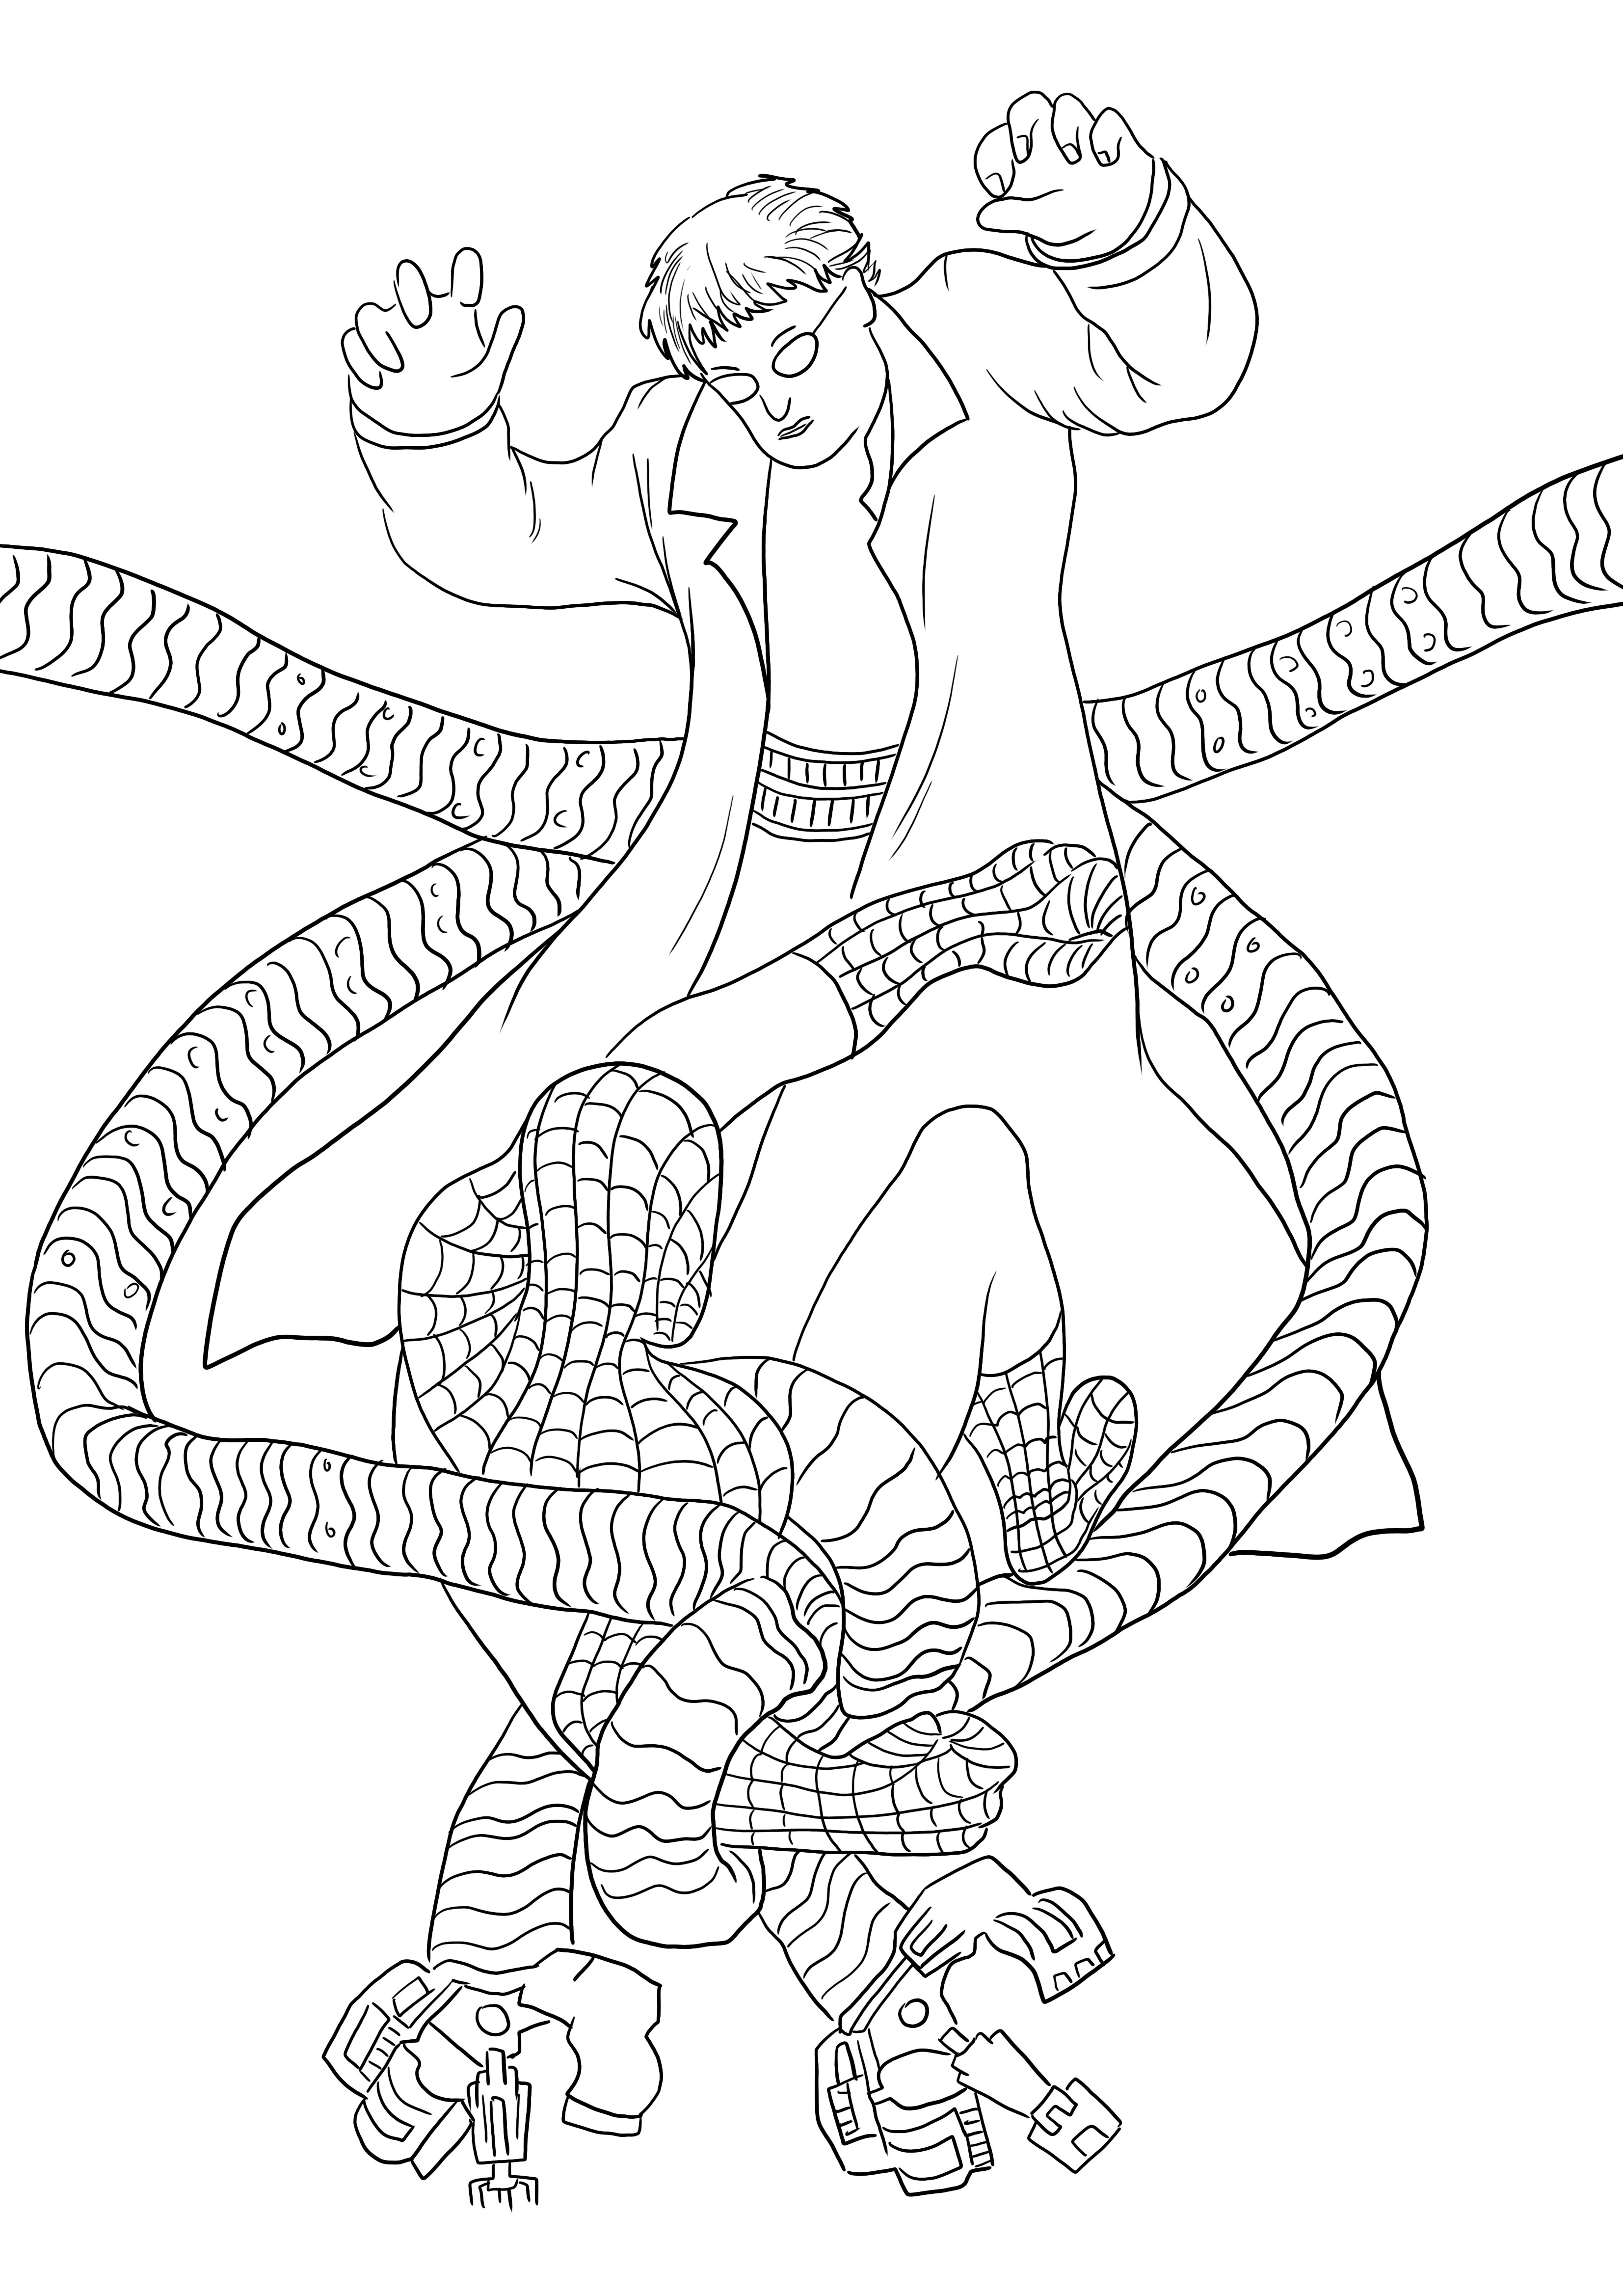 Free to print Encounter of Spiderman coloring page to easy color for kids